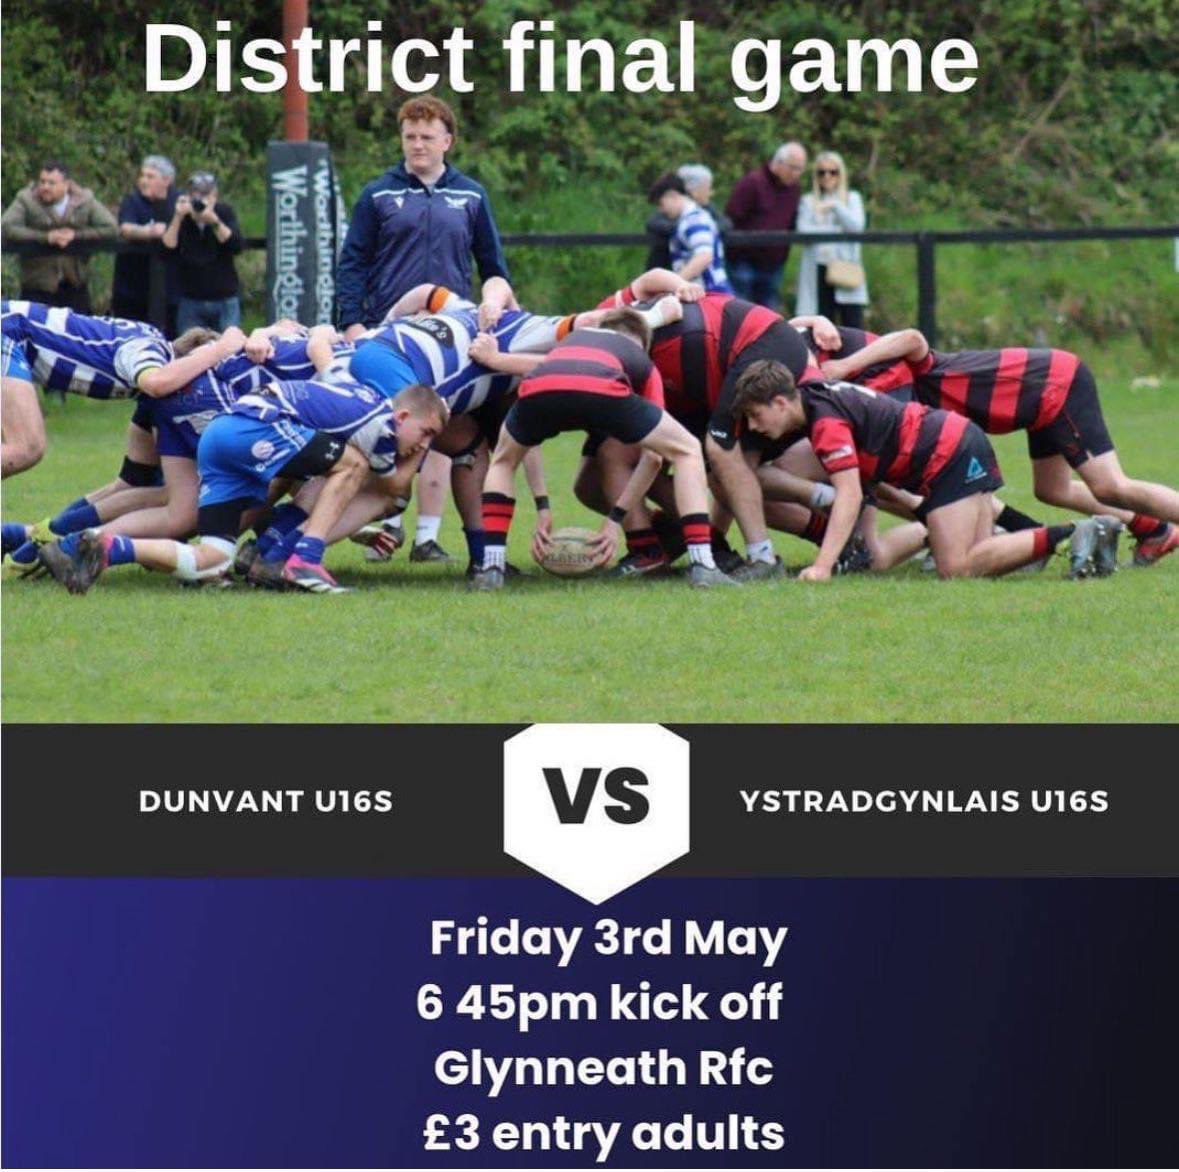 Our under 16s are in the final tonight at 6 45pm In Glynneath.  The boys take on Dunvant.  Entry is £3 for adults.  Good look boys. 🔵⚪️🔵